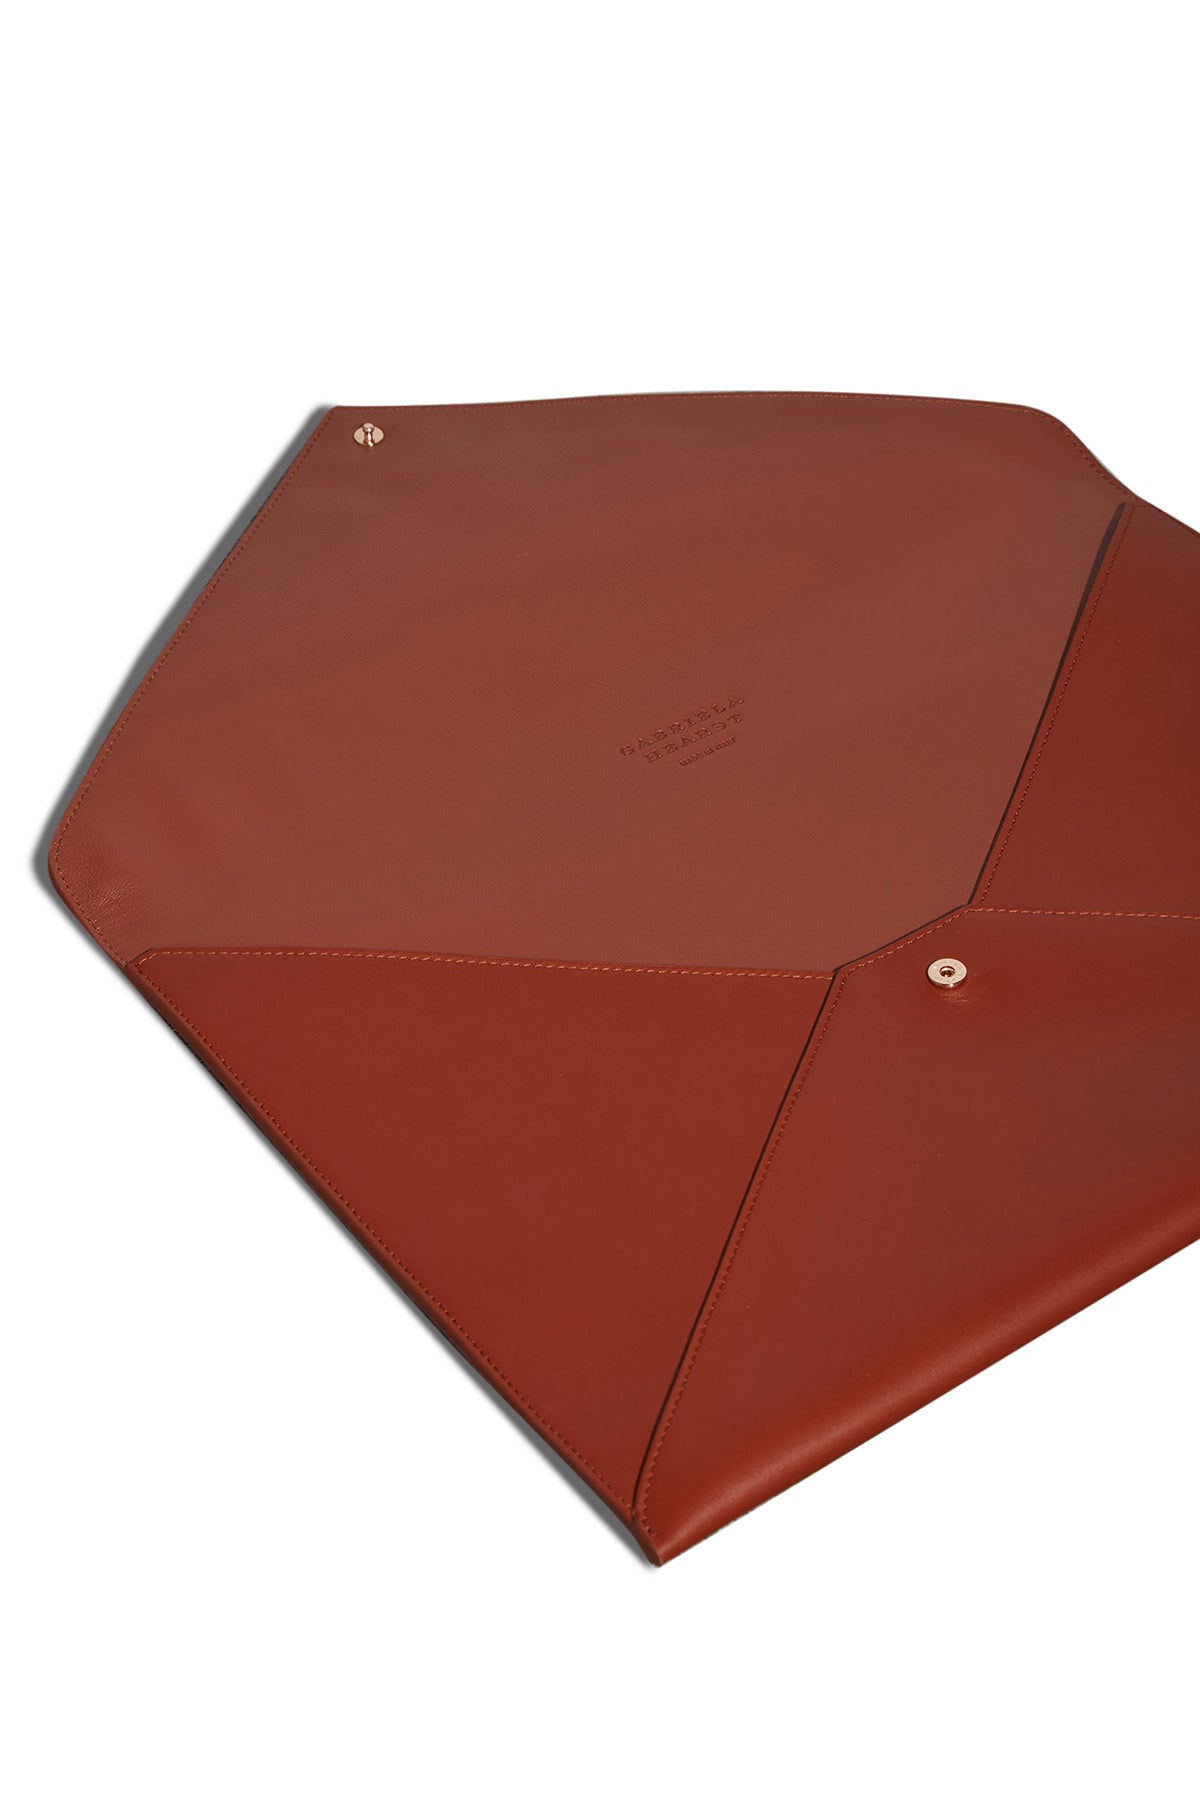 Large Envelope in Cognac Nappa Leather